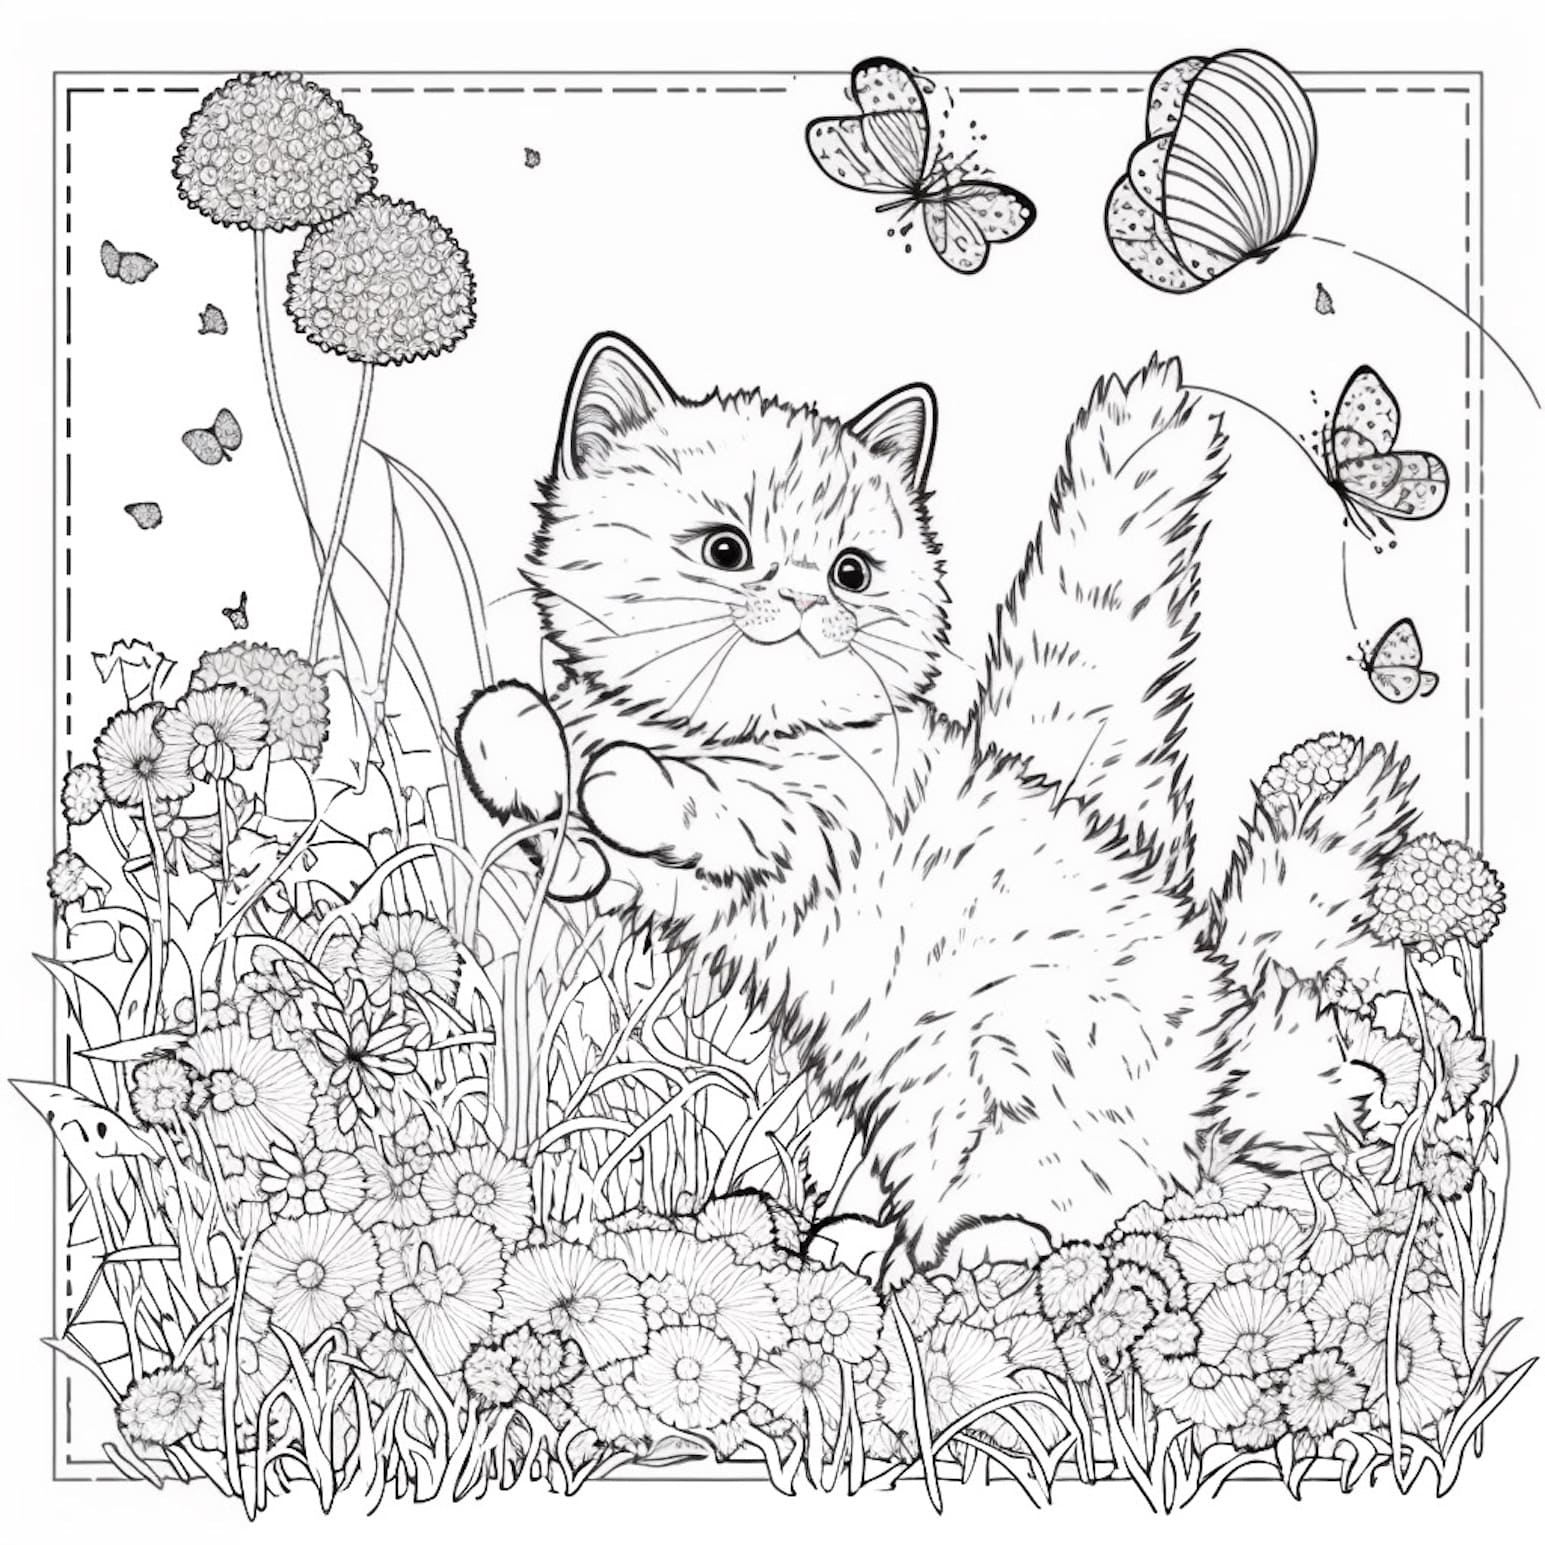 https://www.ourmindfullife.com/wp-content/uploads/2023/04/Cute-kitten-coloring-page-original.jpg